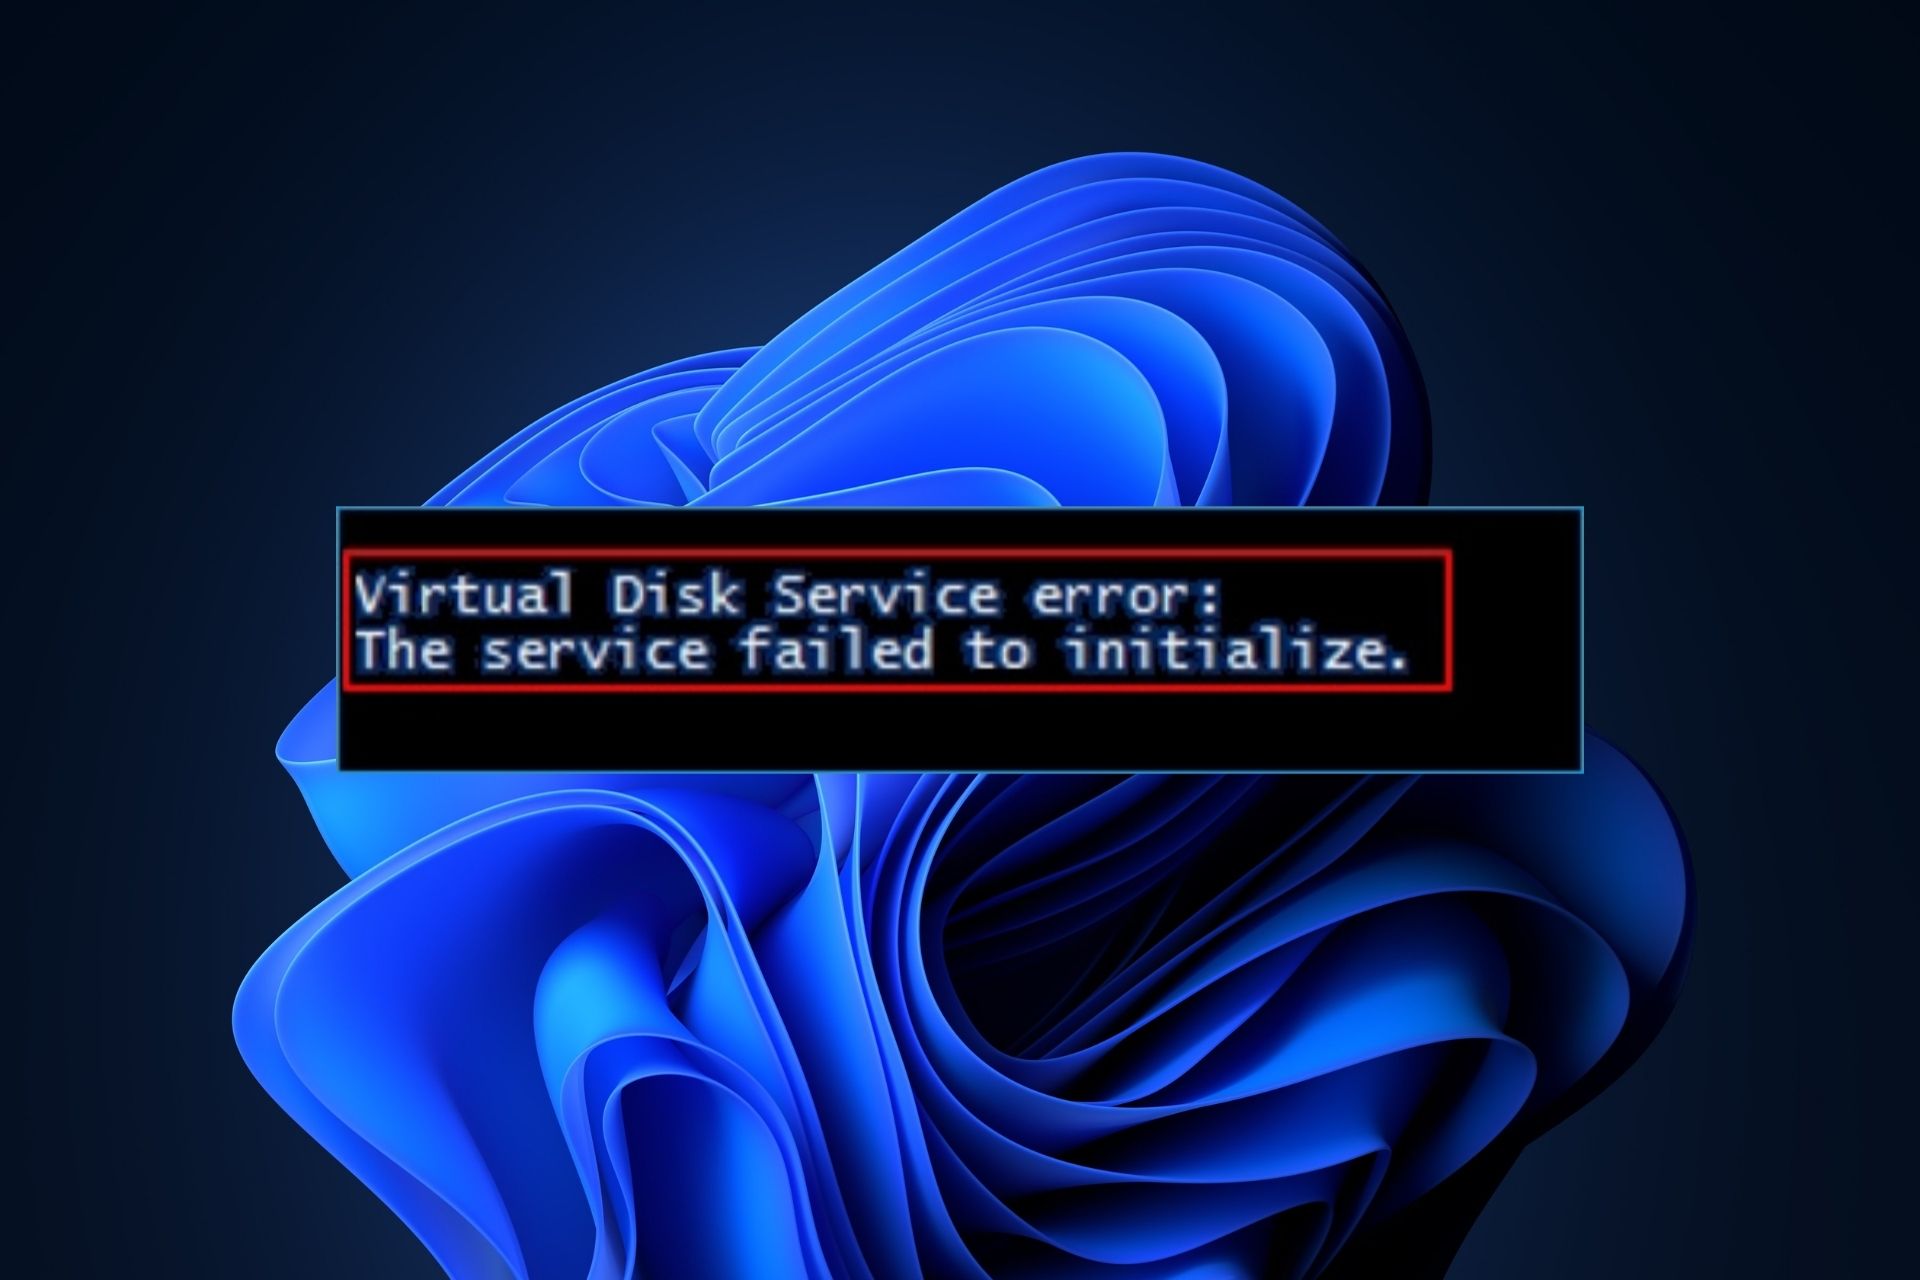 virtual disk service error: the service failed to initialize